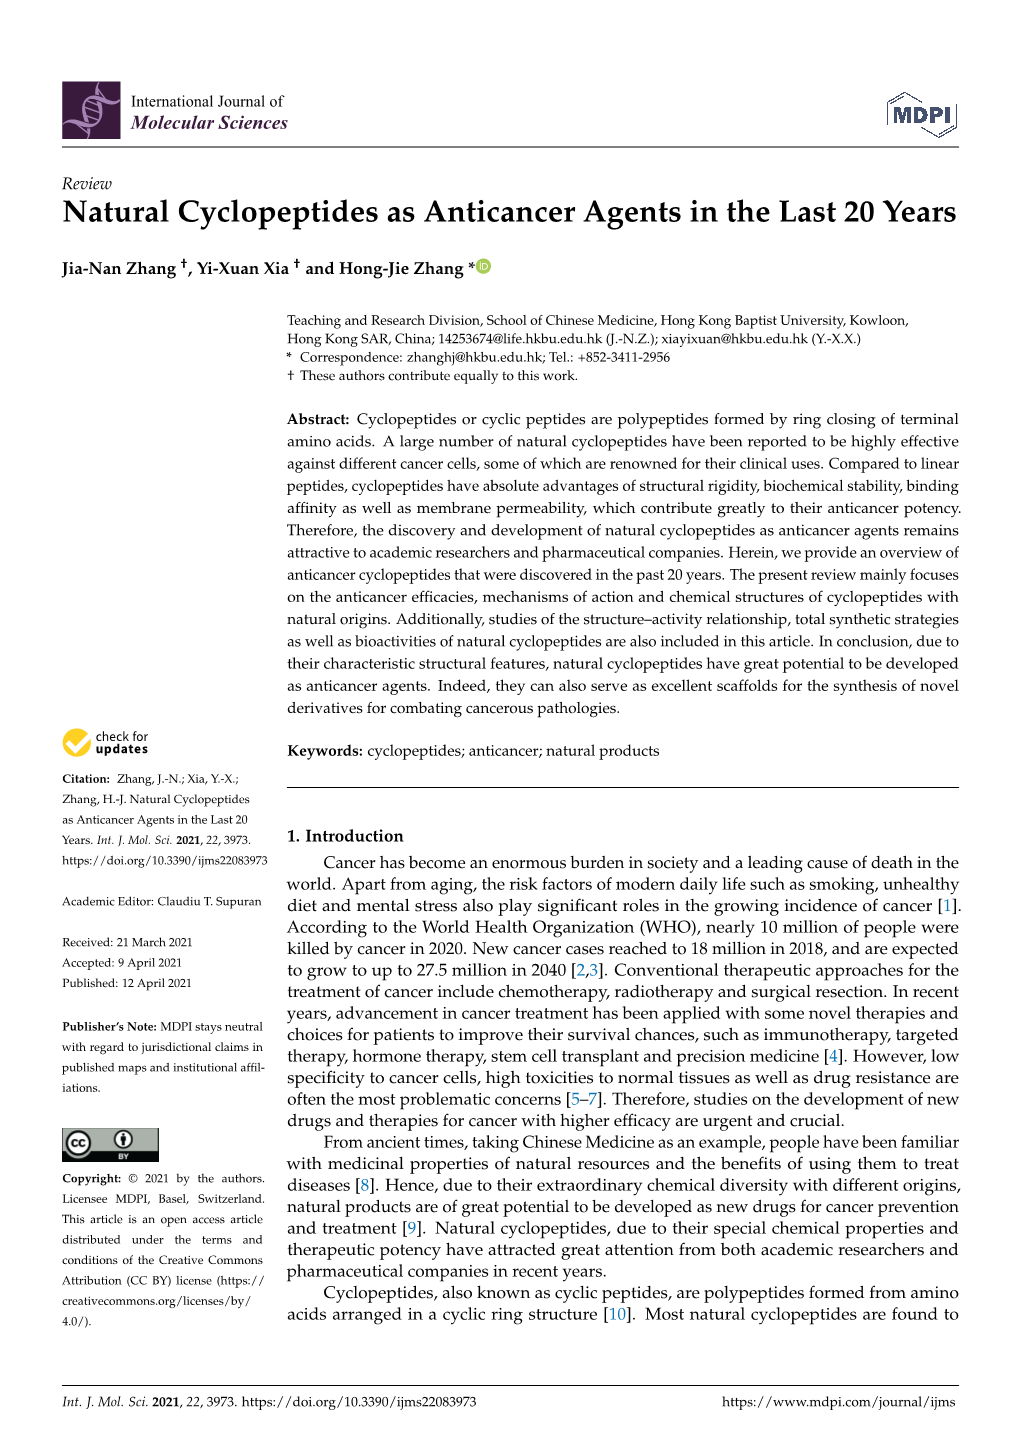 Natural Cyclopeptides As Anticancer Agents in the Last 20 Years